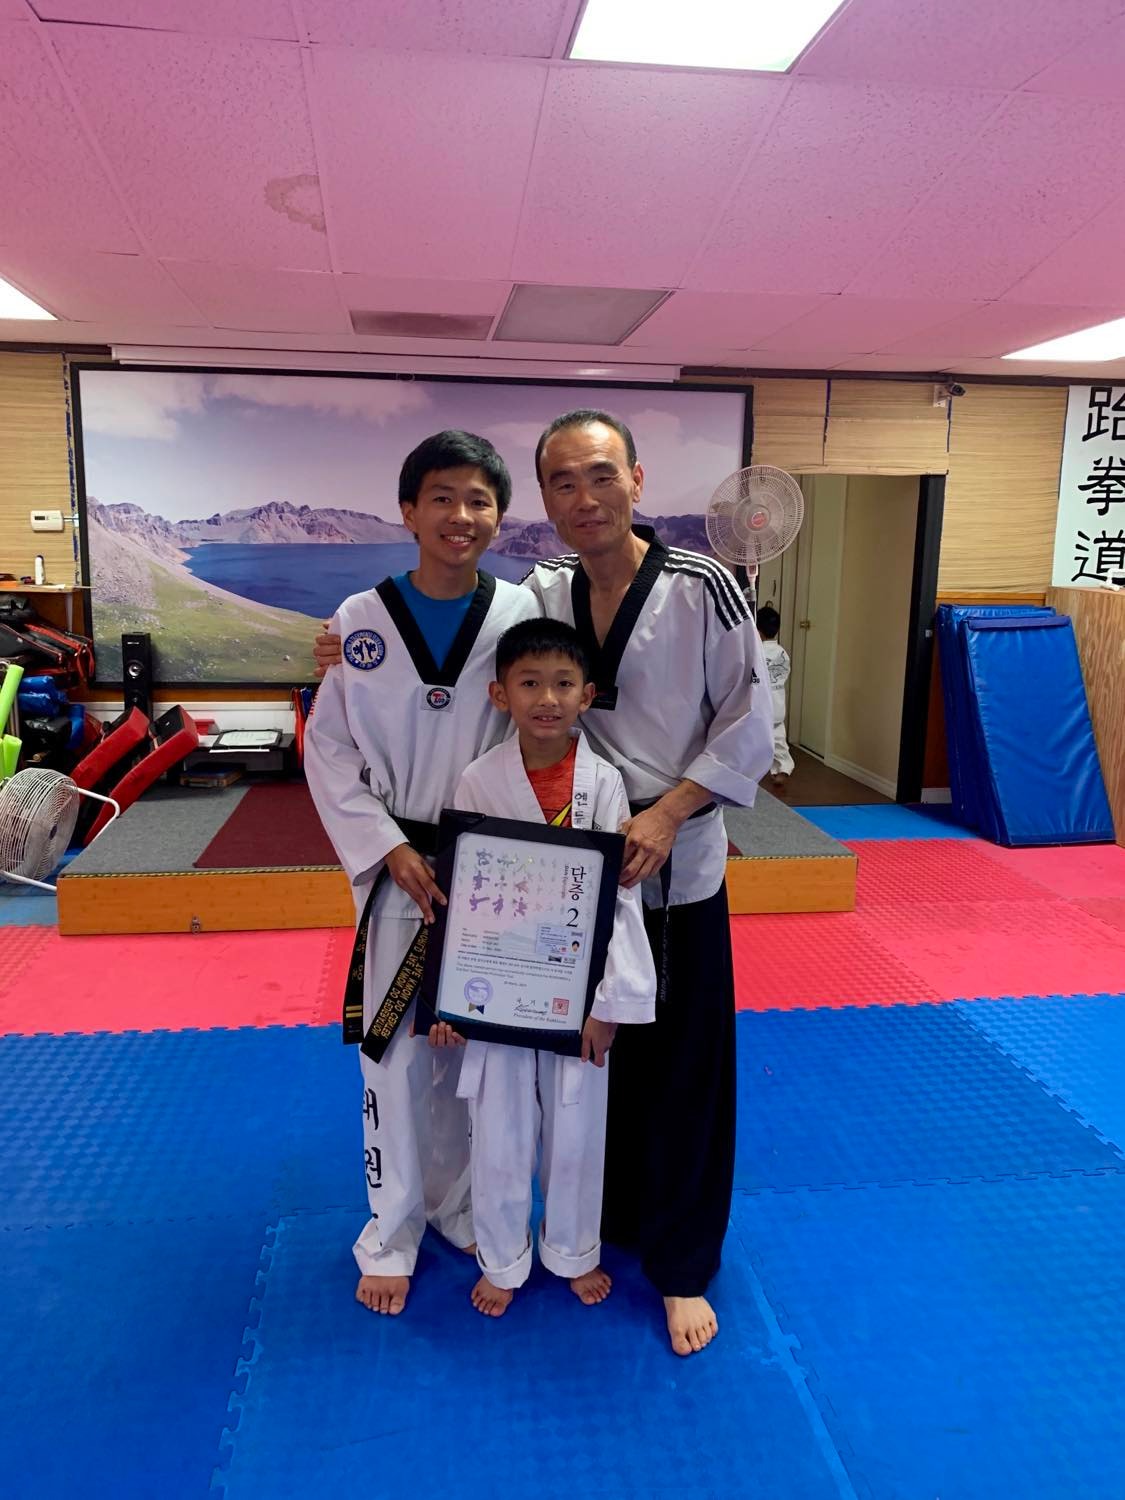 Master Tiger and Andrew with Philip's 2nd-degree black belt certificate